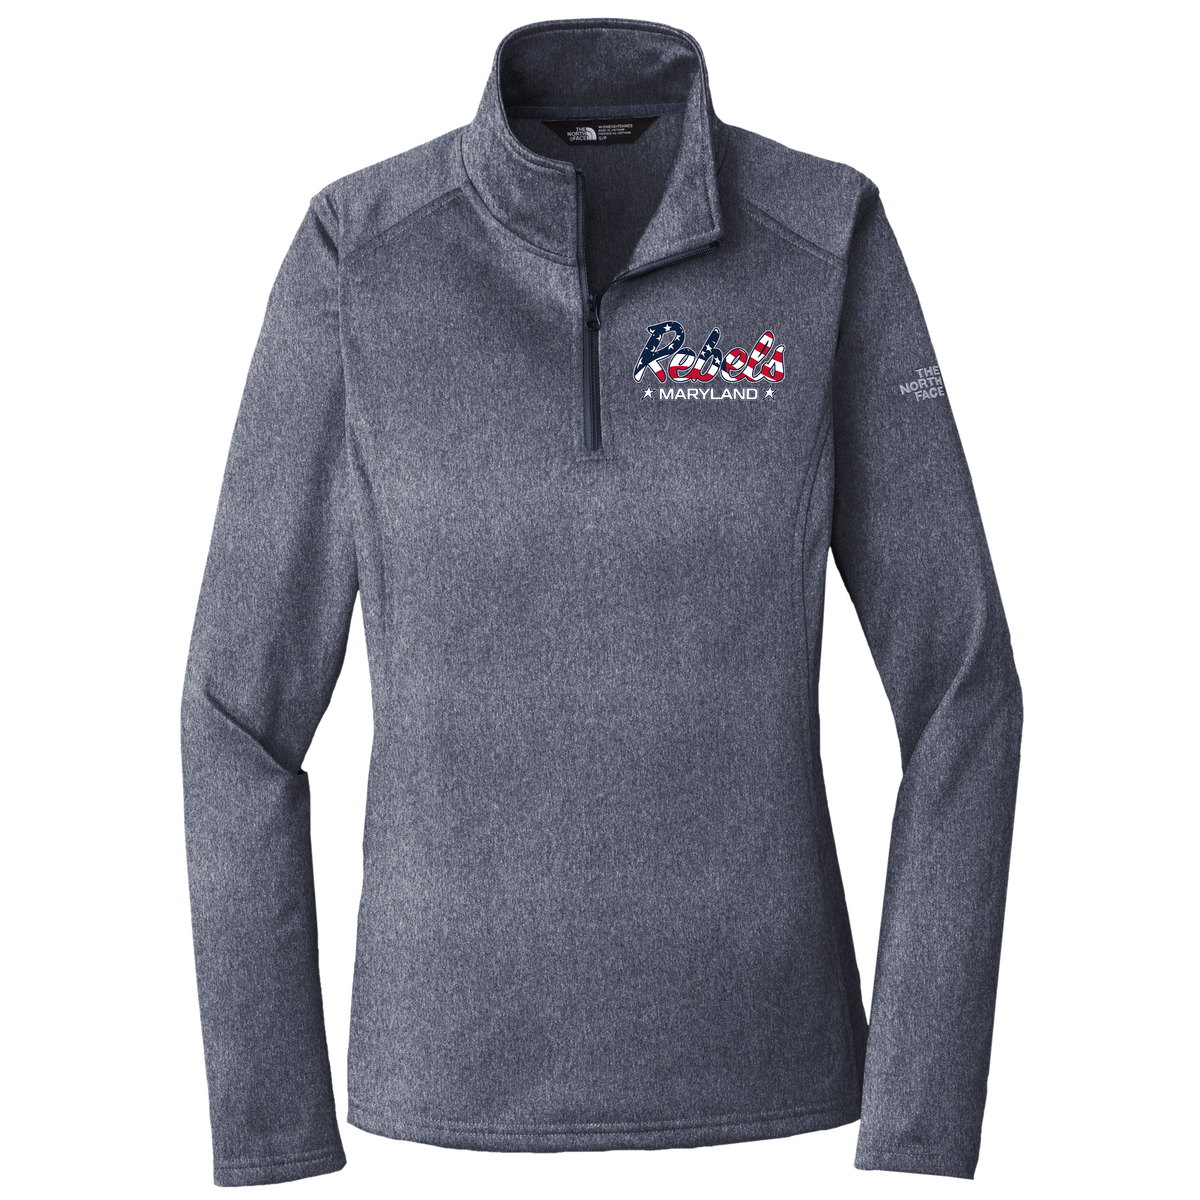 Rebels Maryland The North Face Ladies Tech 1/4 Zip